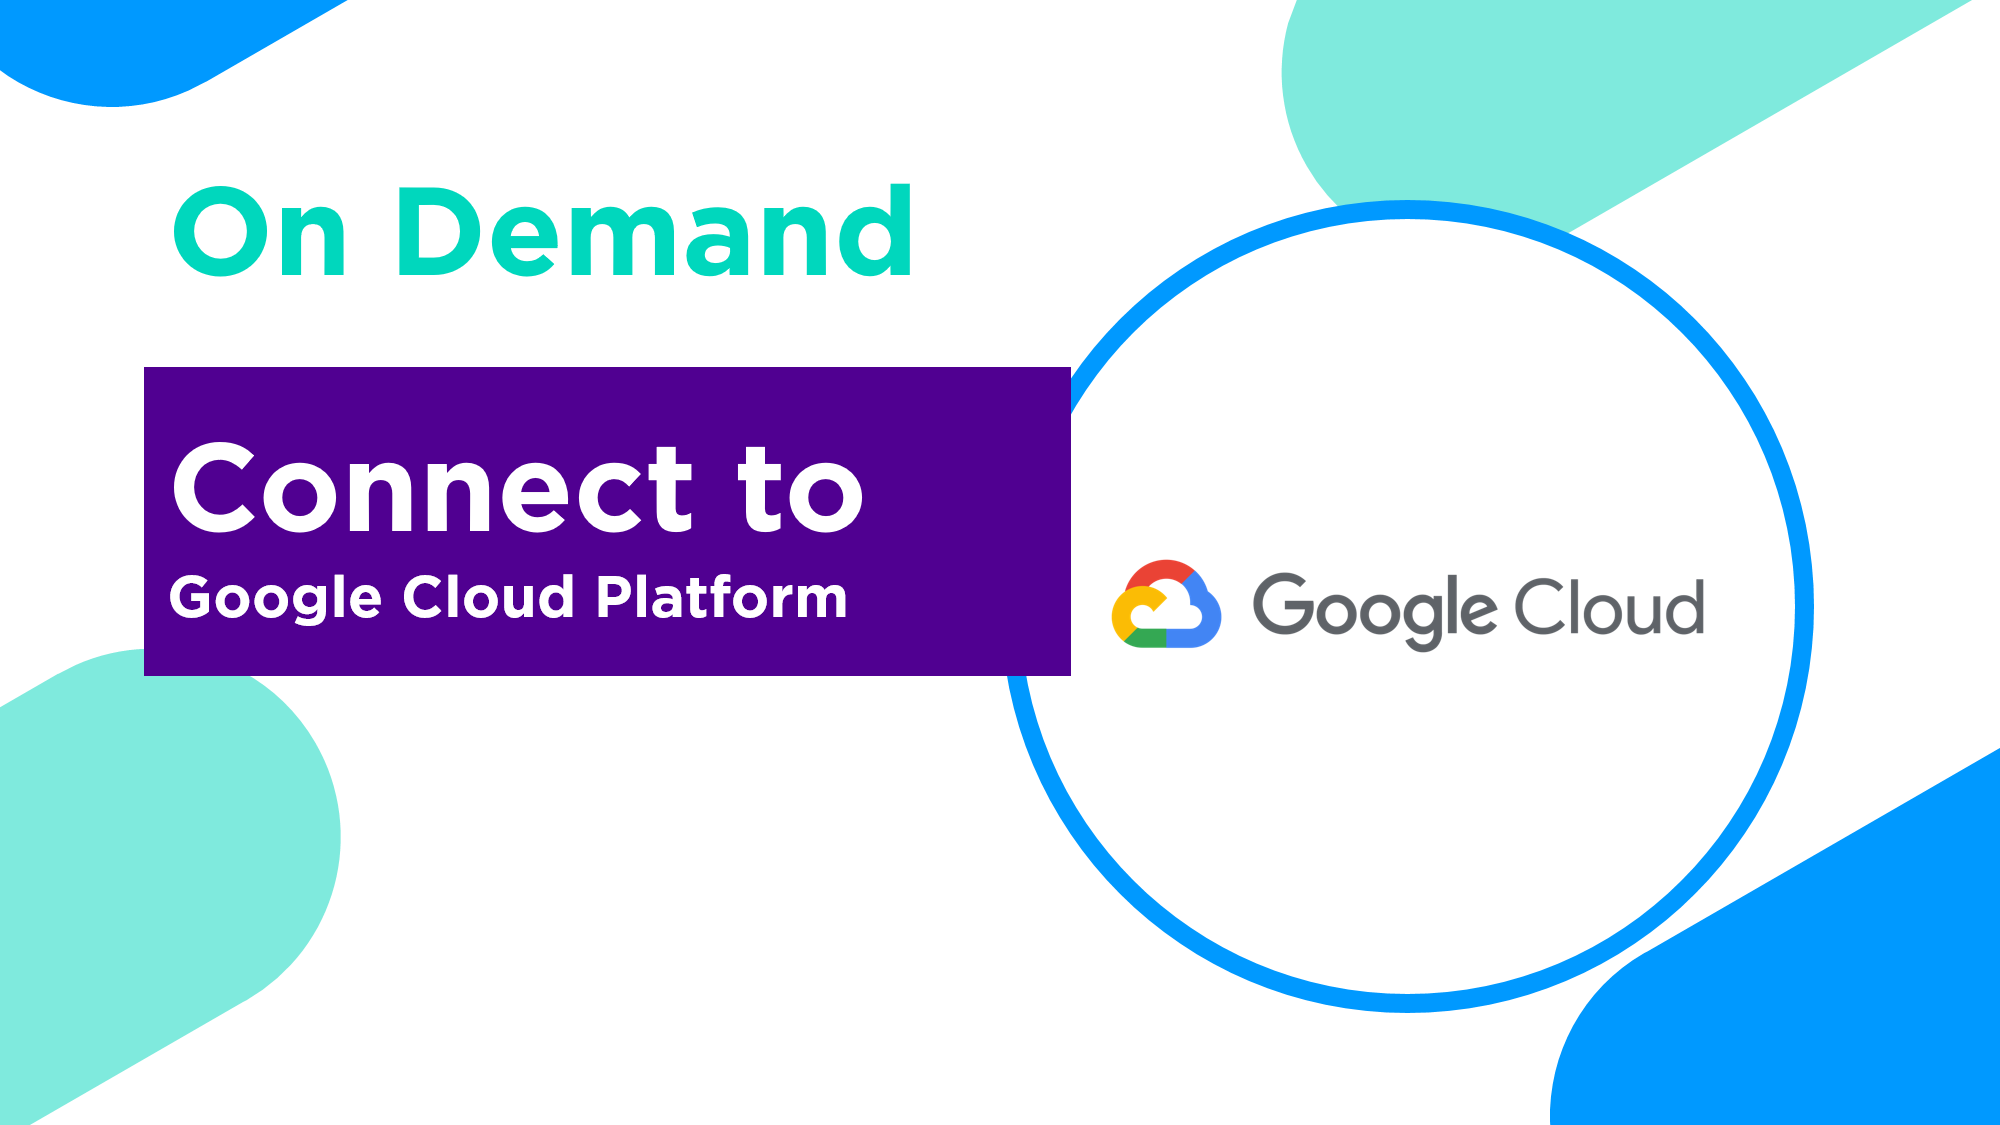 Connect to Google Cloud